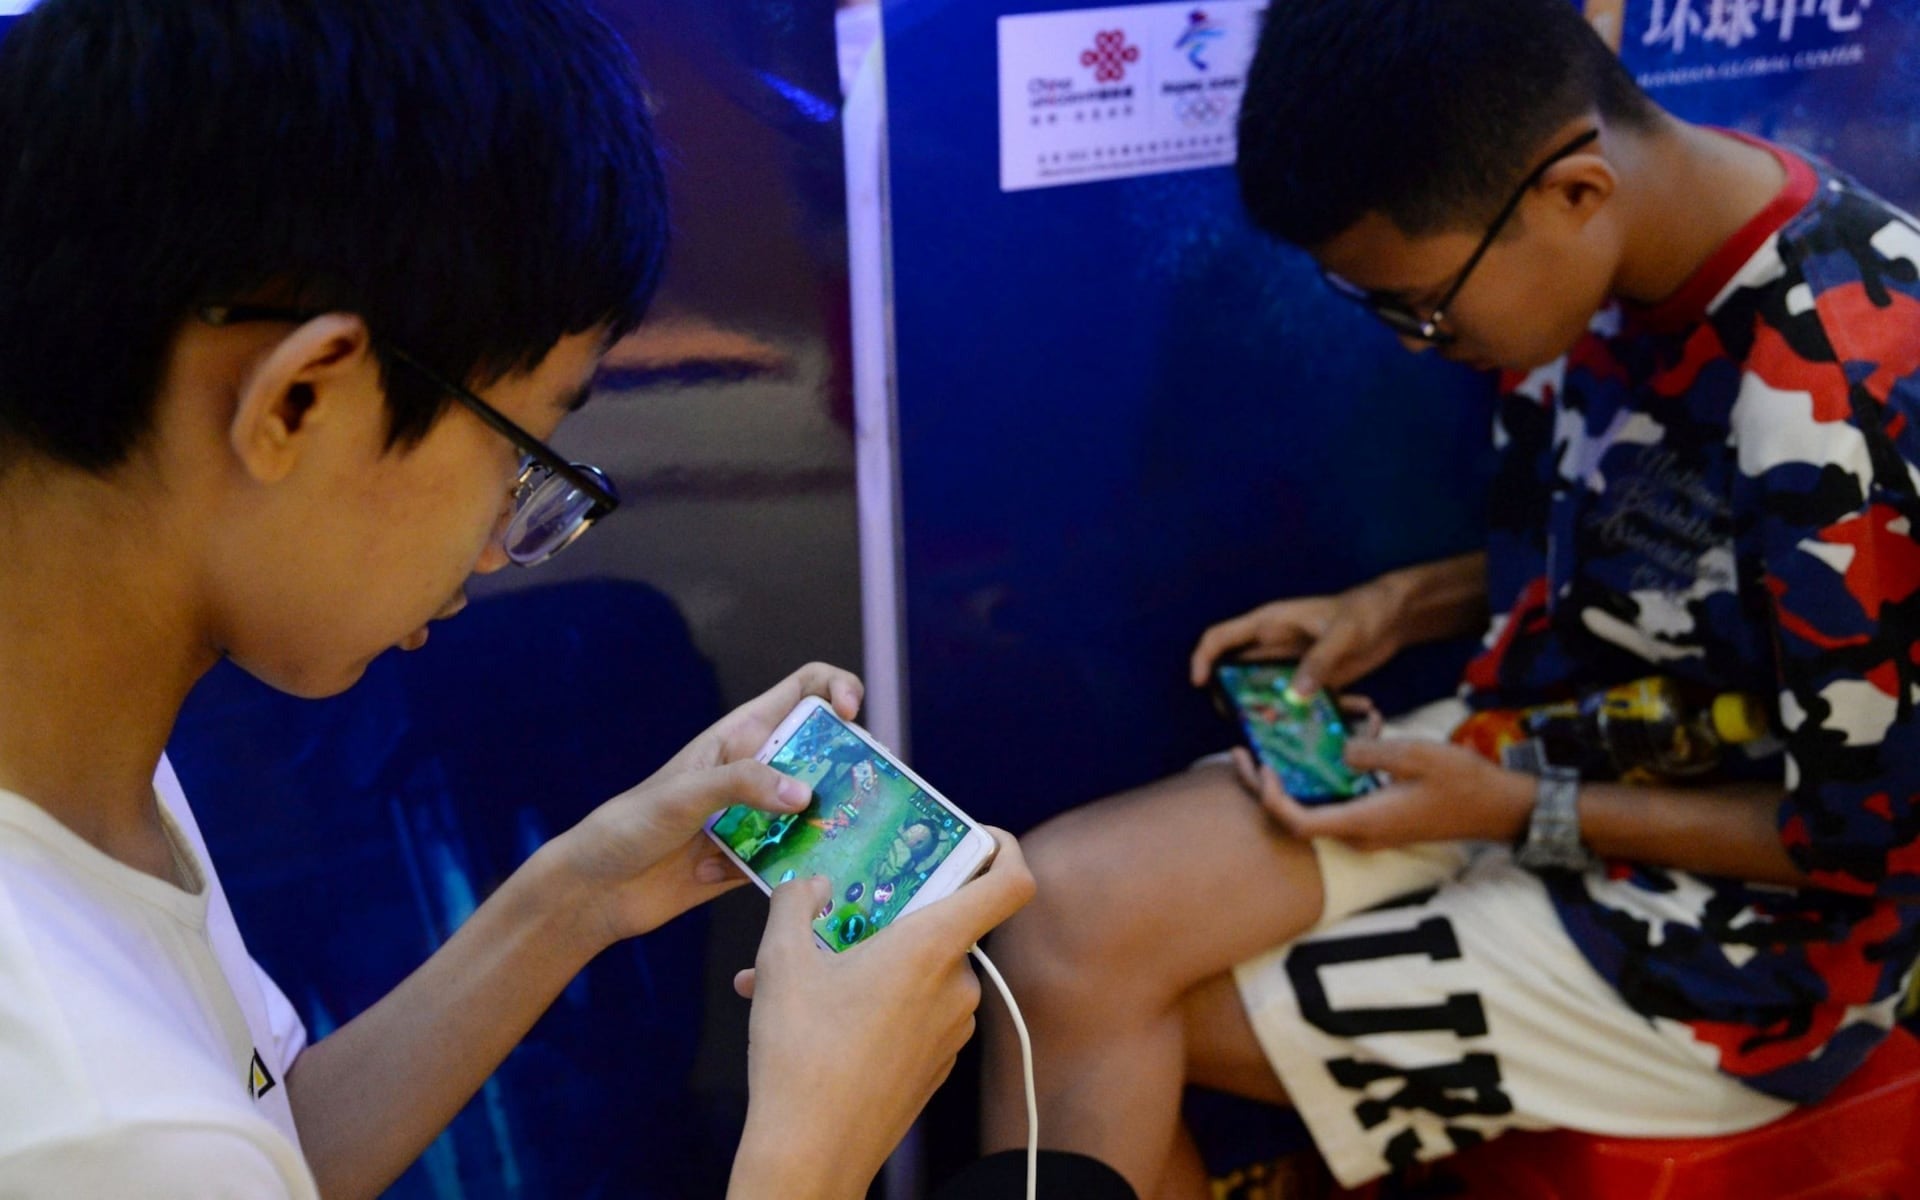 No More Video Games For Kids Under 18 For More Than 90 Mins &Amp; After 10Pm, China Says - World Of Buzz